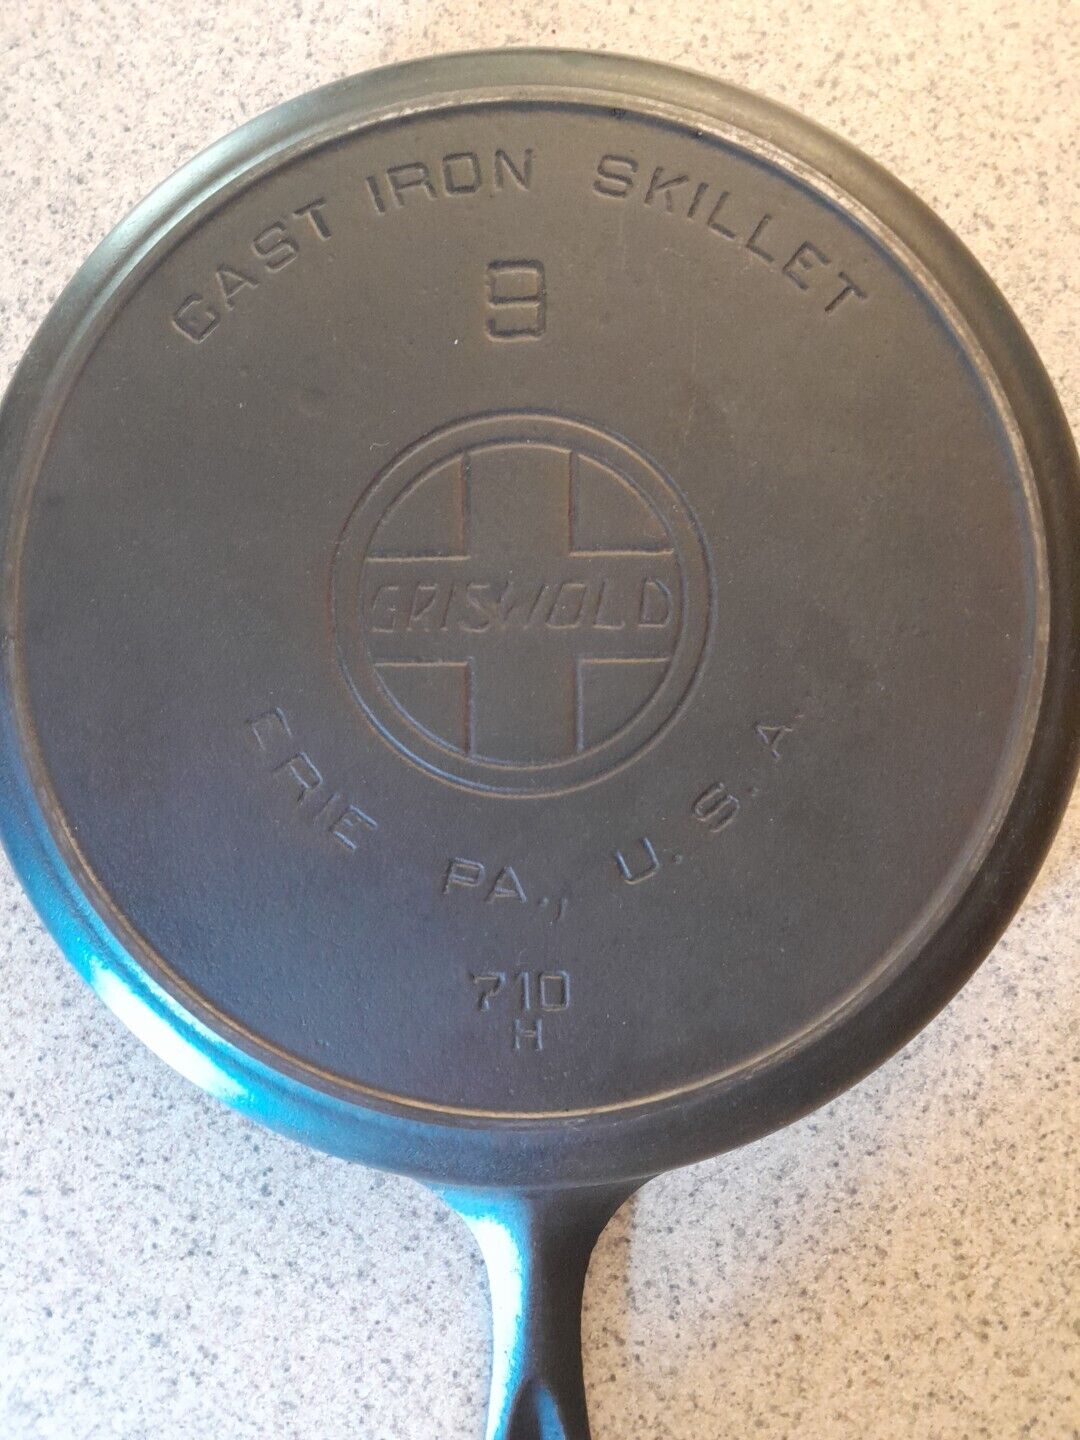 *damaged* GRISWOLD #9 CAST IRON SKILLET WITH HEAT RING LARGE BLOCK LOGO 710 H 